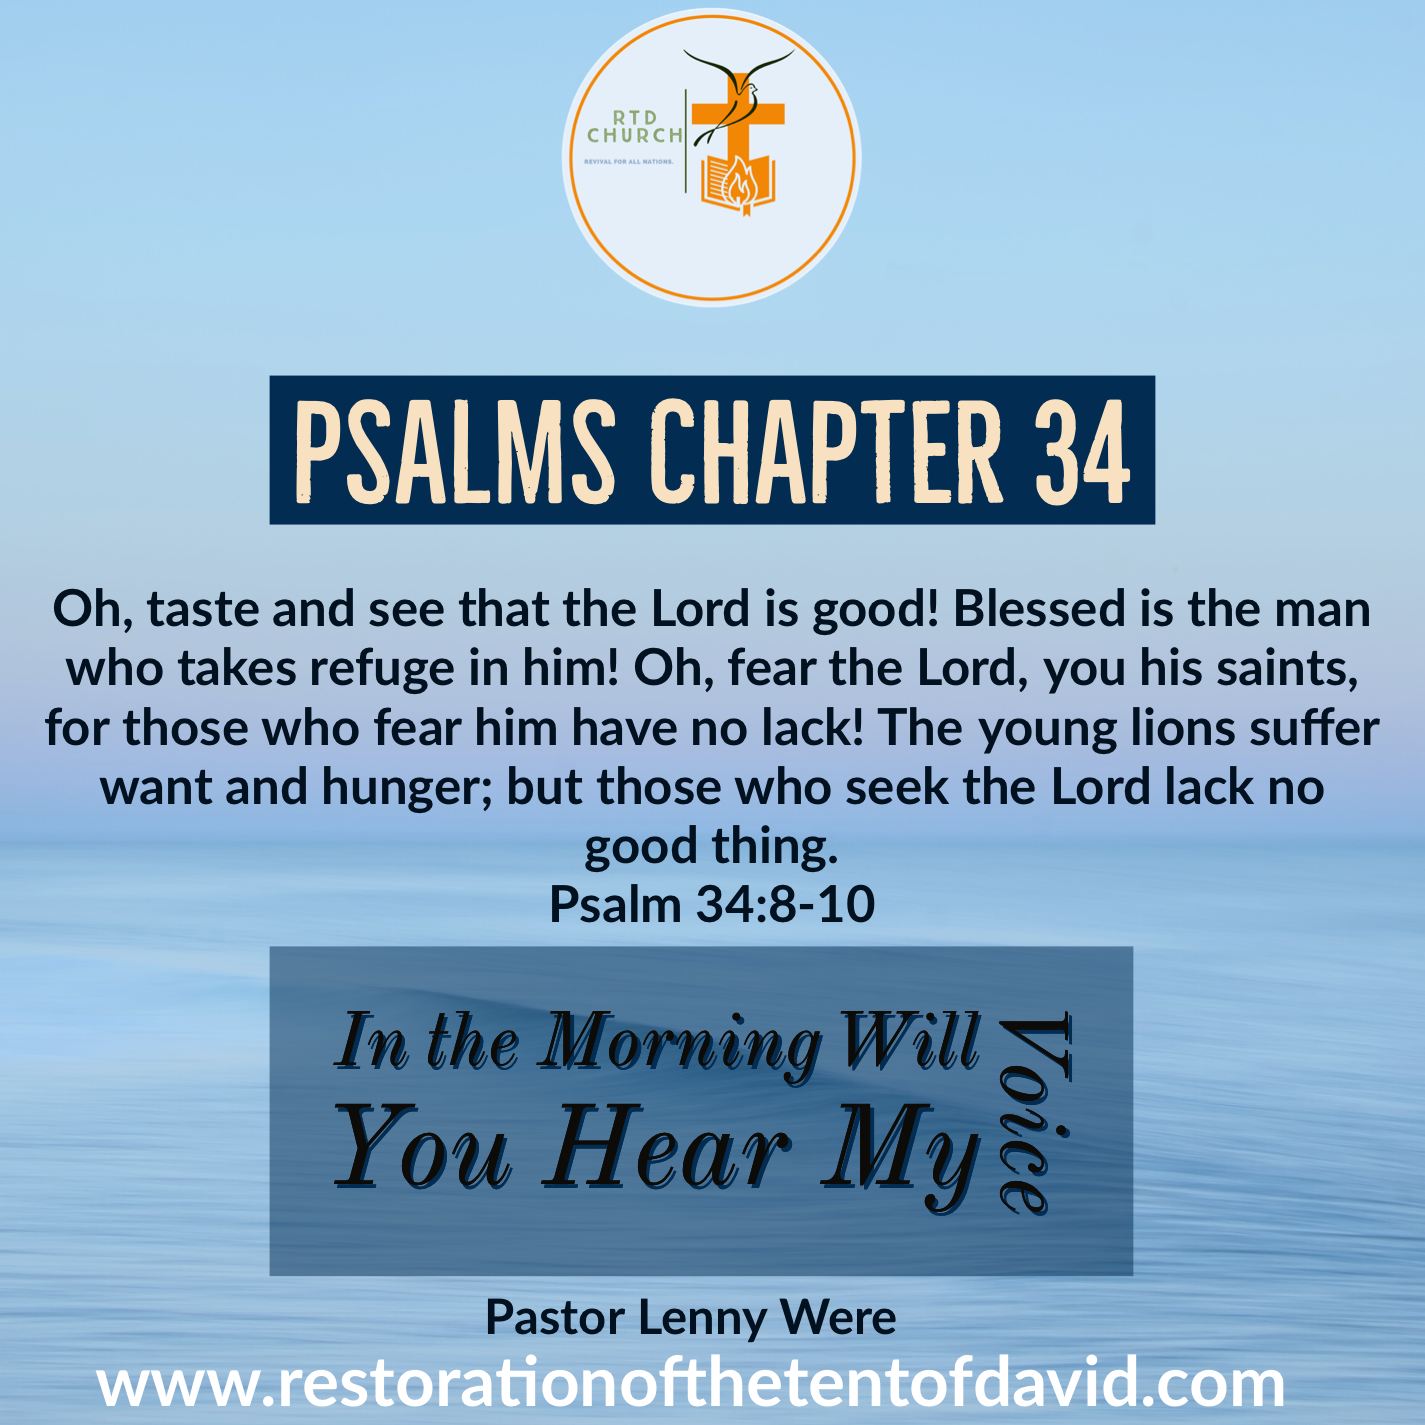 In the Morning will you Hear my Voice, Psalms Chapter 34.